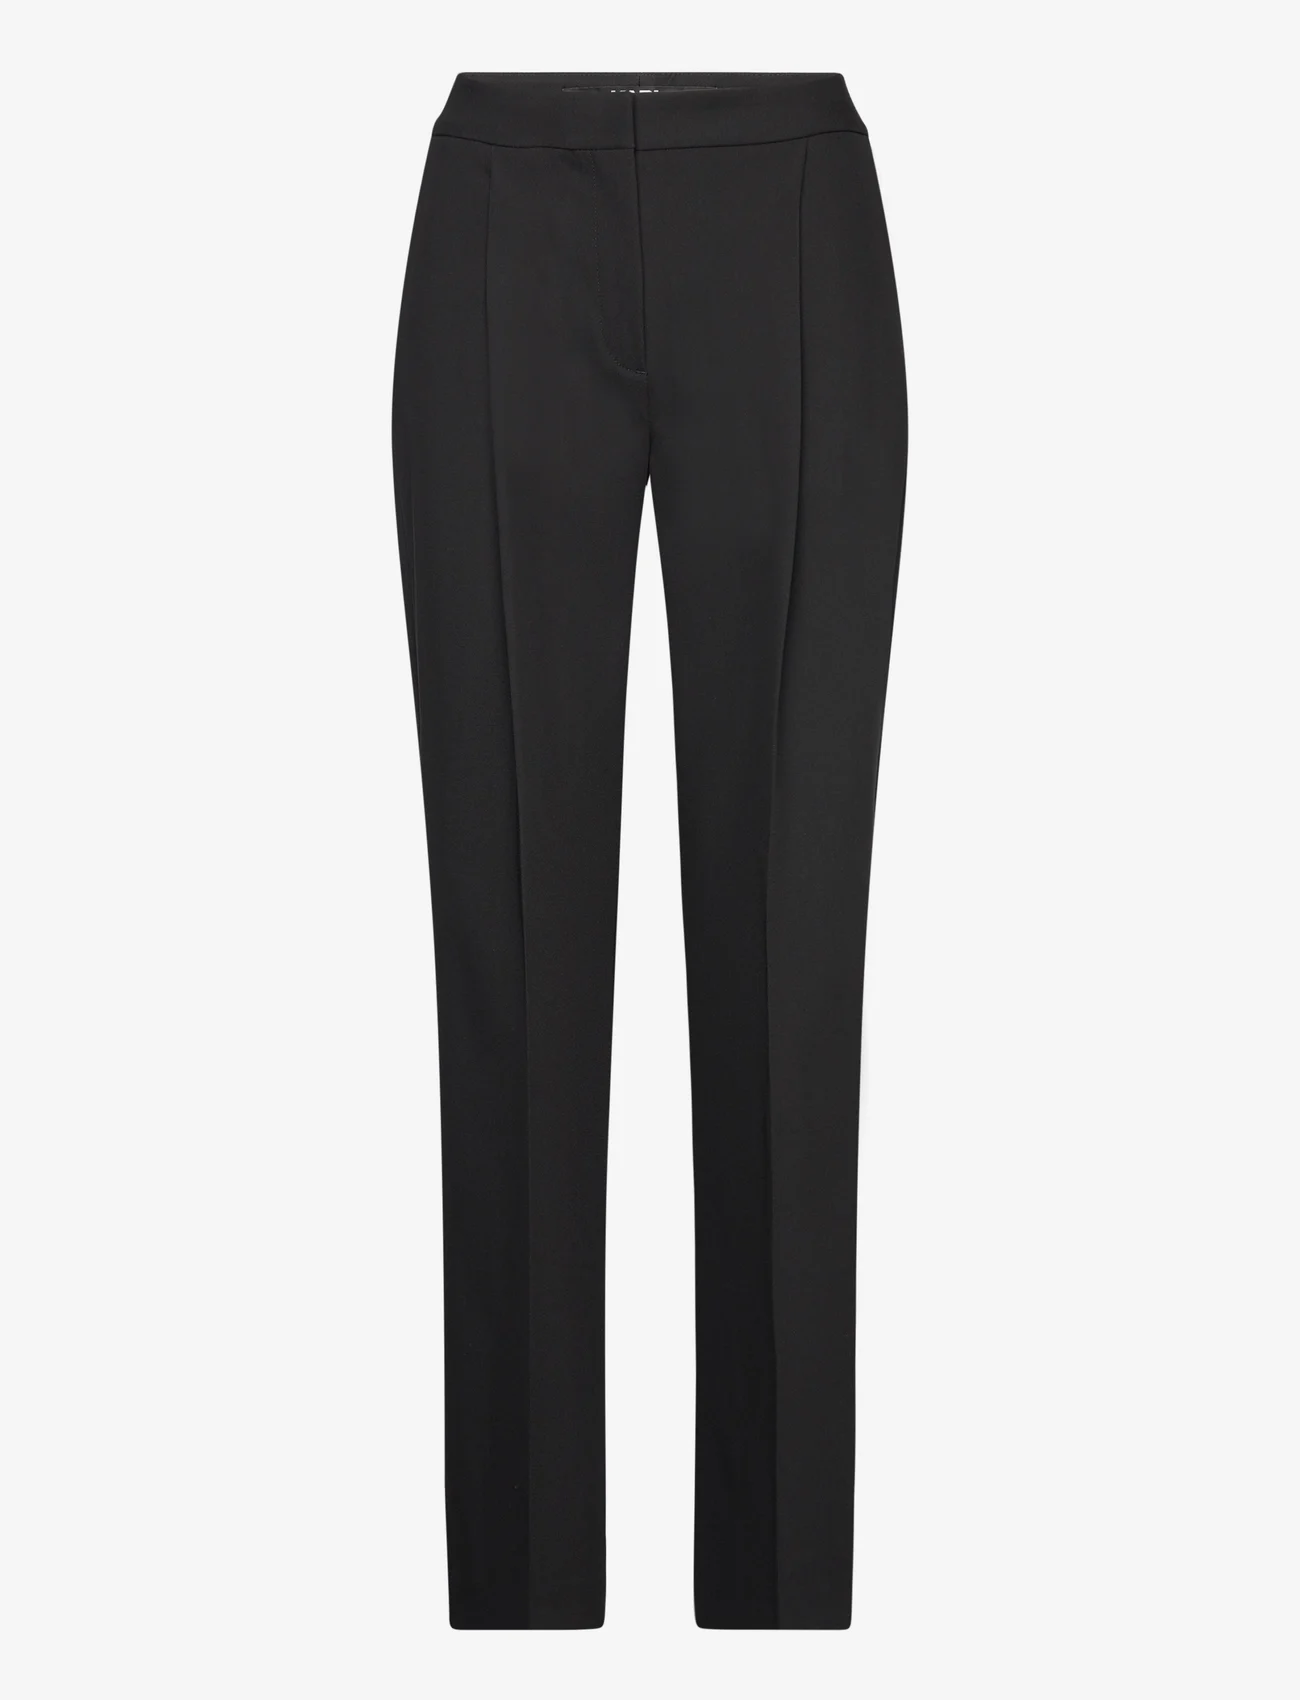 Karl Lagerfeld - tailored pants - tailored trousers - black - 0